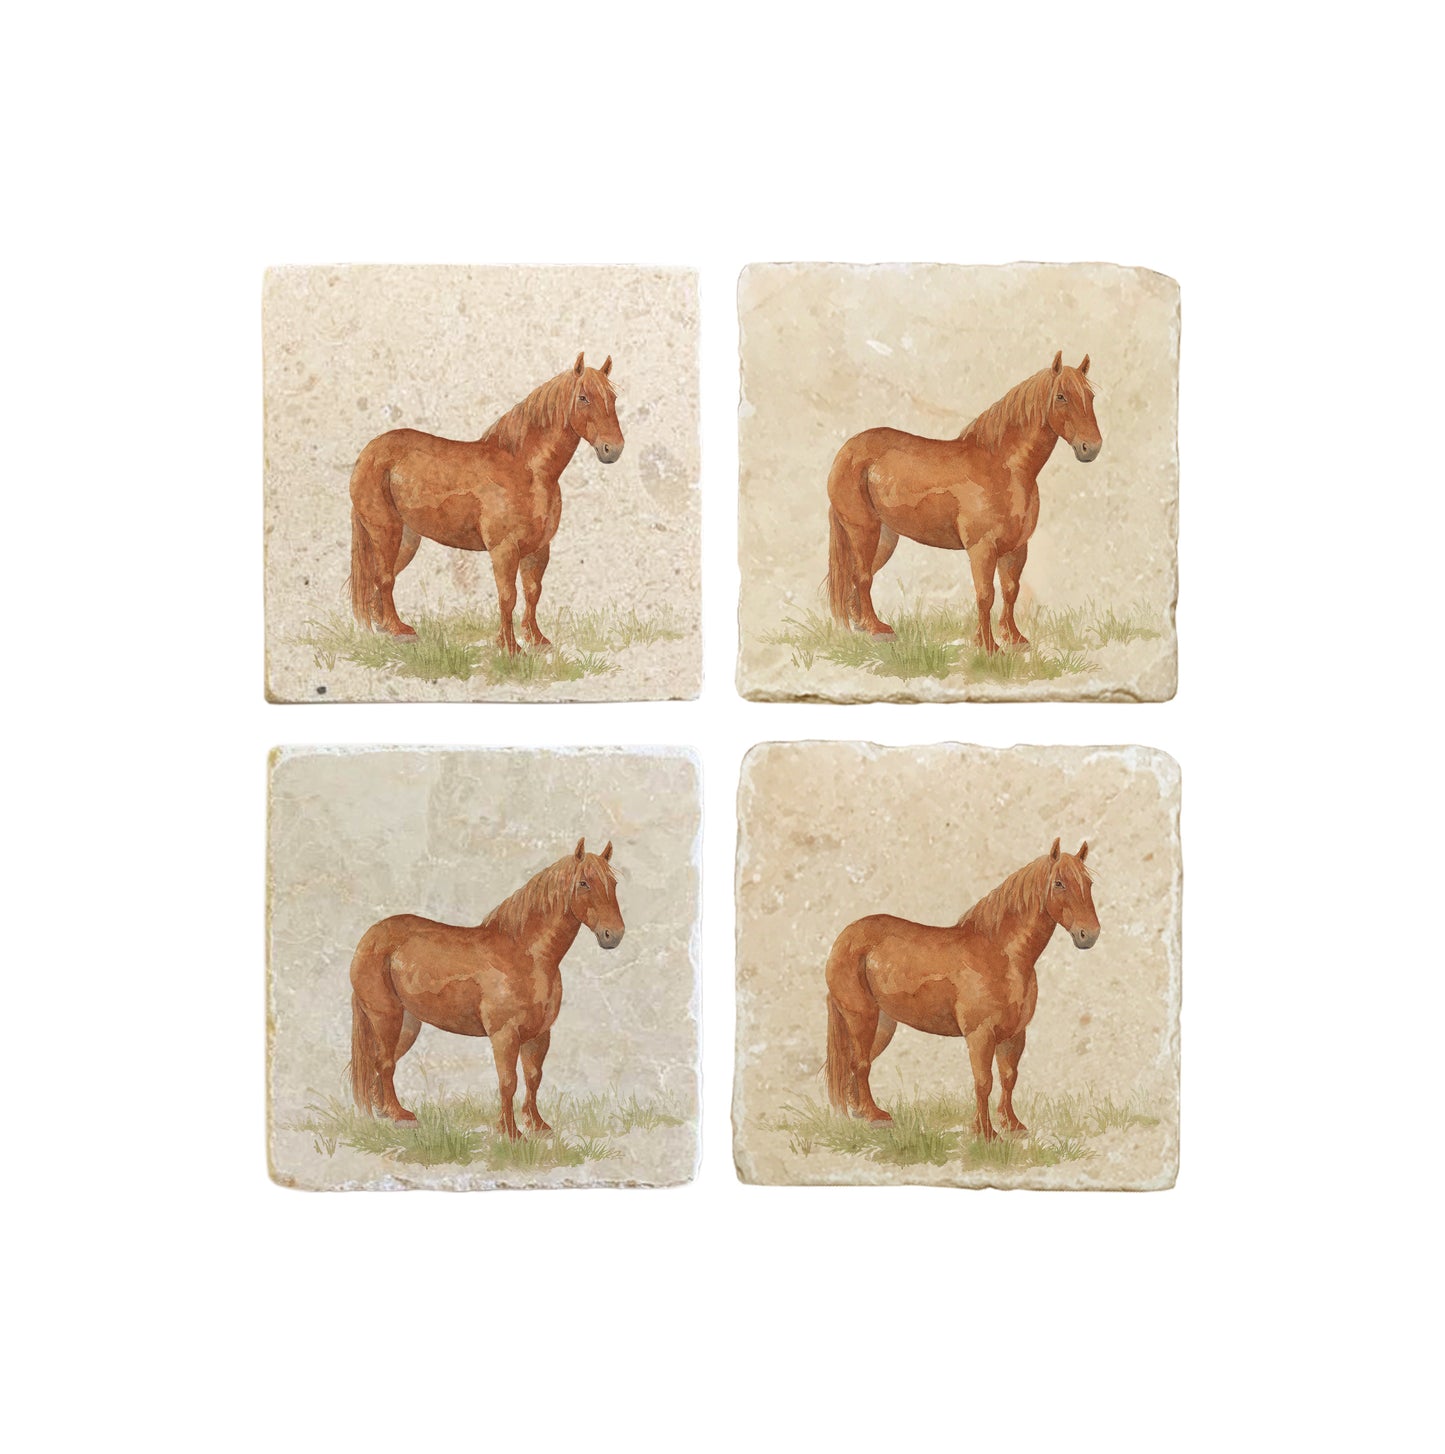 A set of 4 square marble coasters, featuring a watercolour design featuring a watercolour design of a rare breed Suffolk Punch horse in a grassy field.